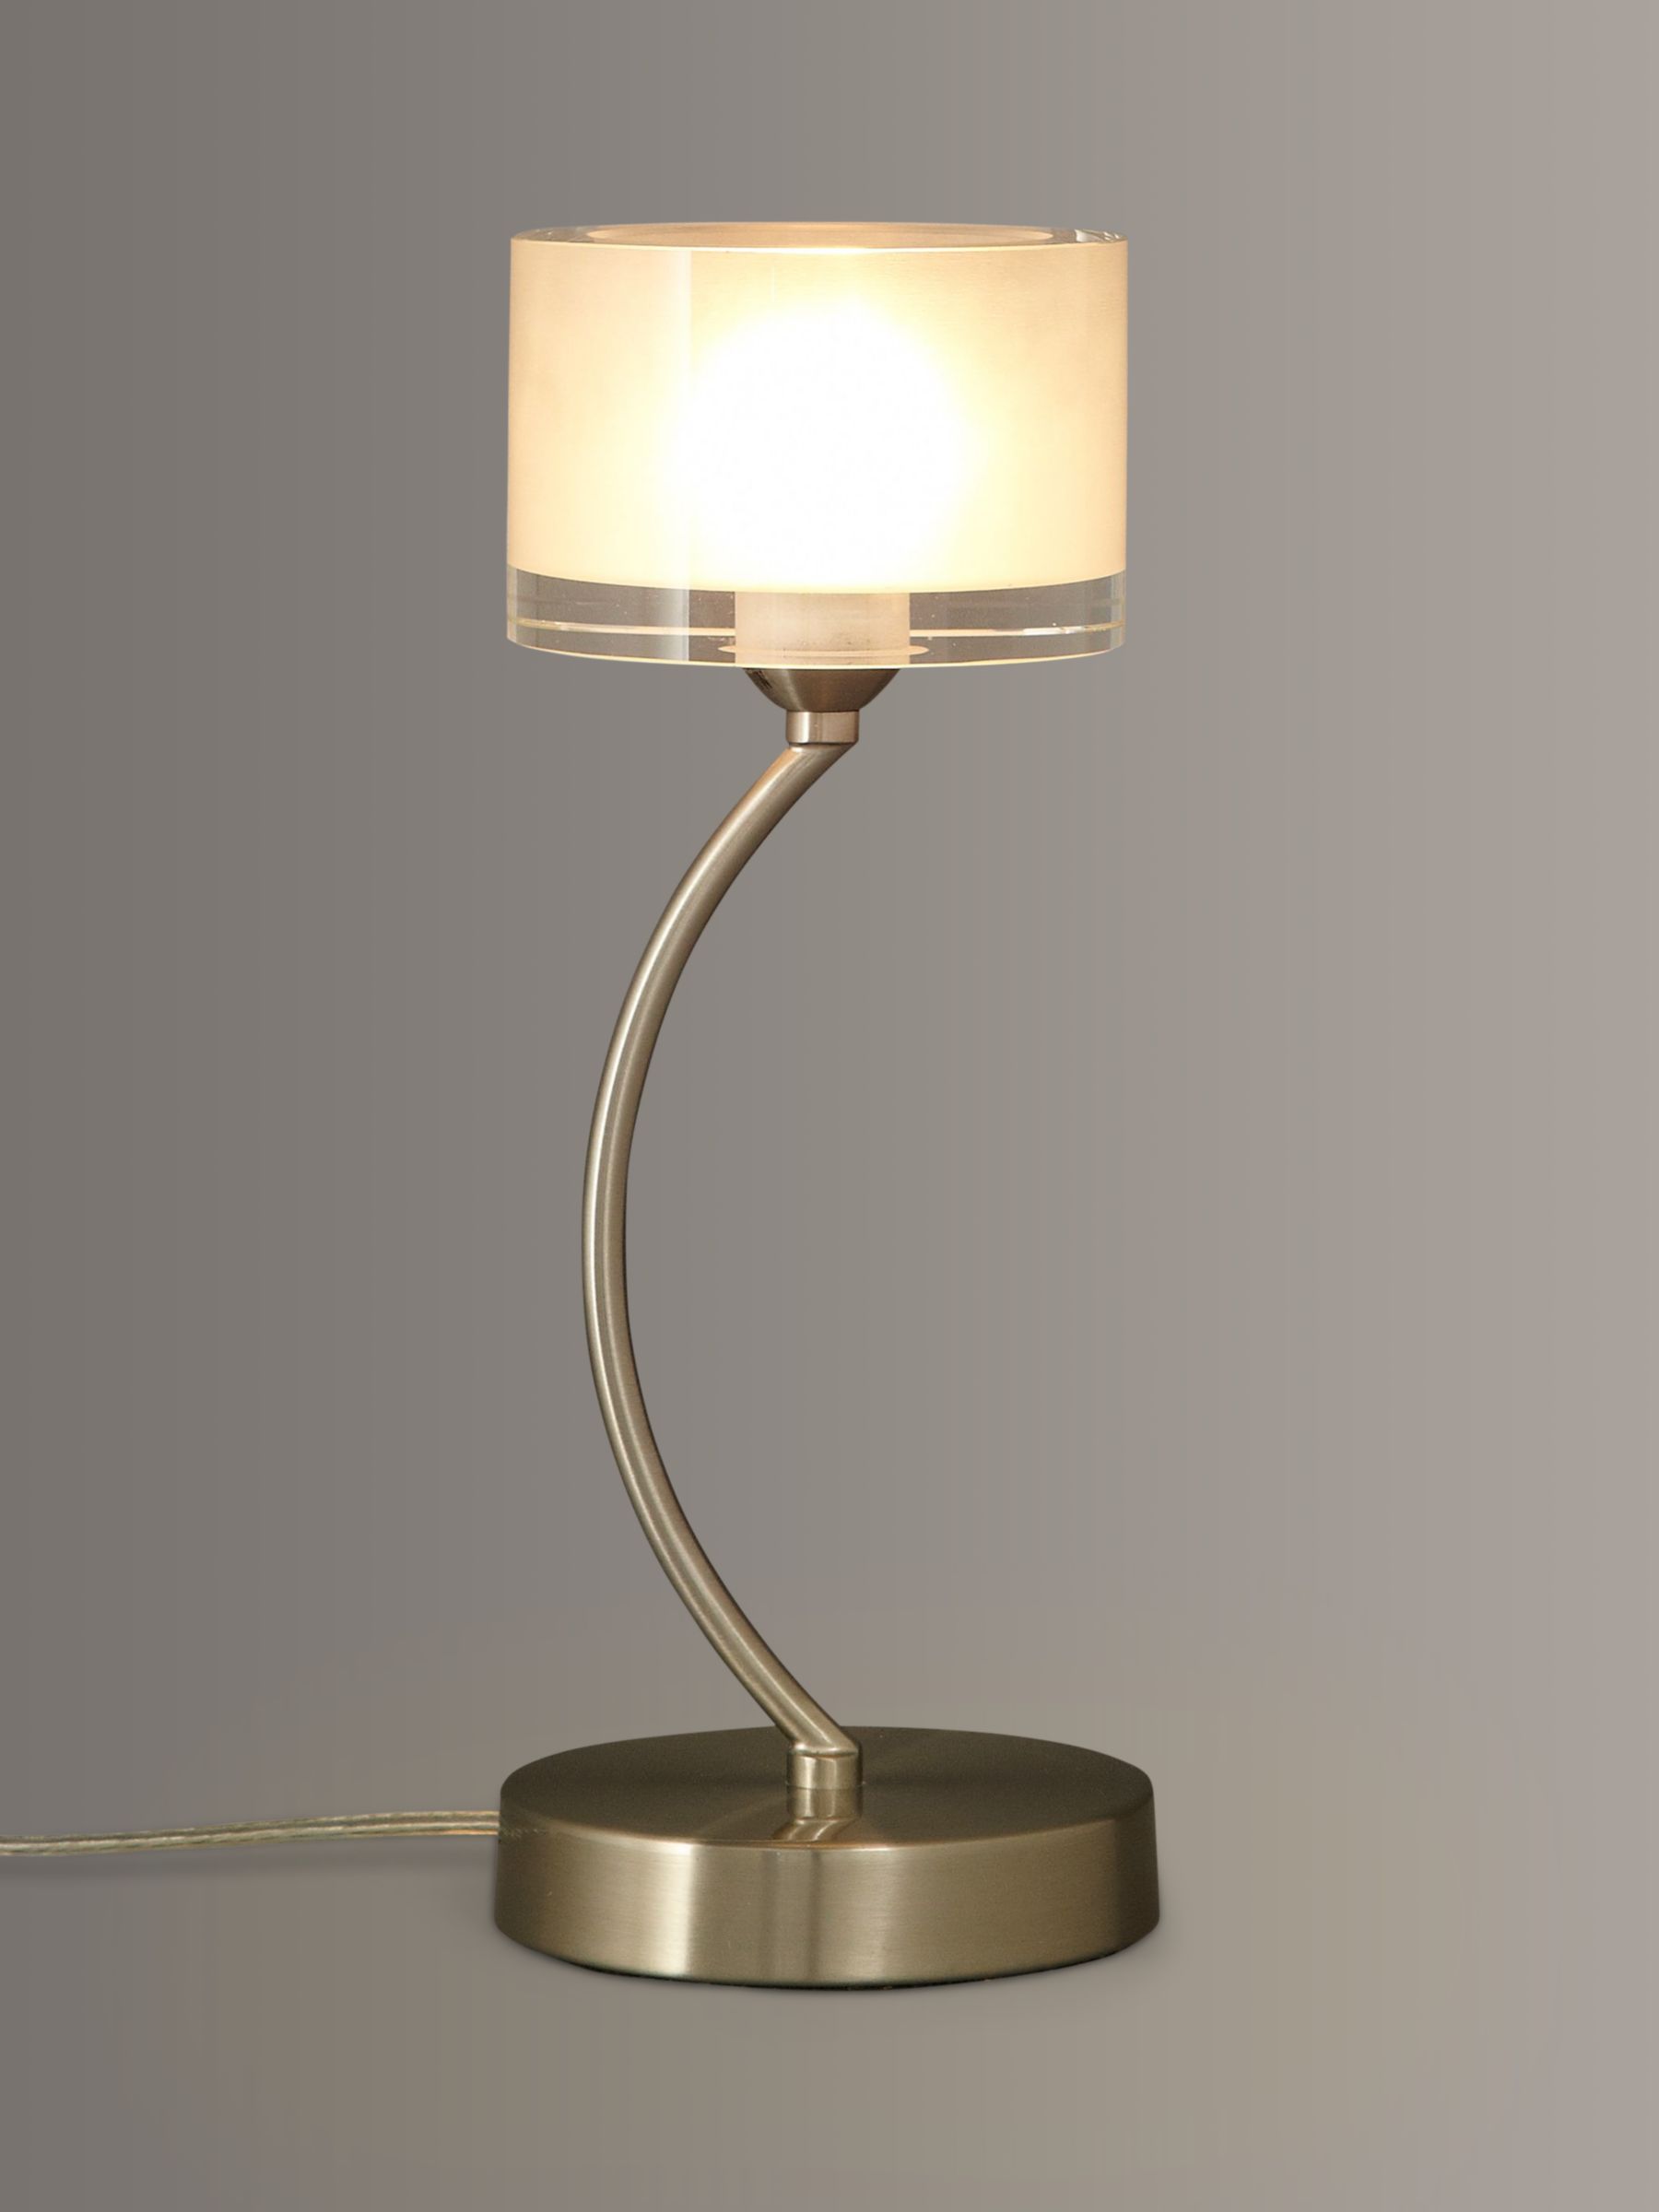 Paige Touch On Off Table Lamp Satin Chrome, Touch Table Lamp Uk